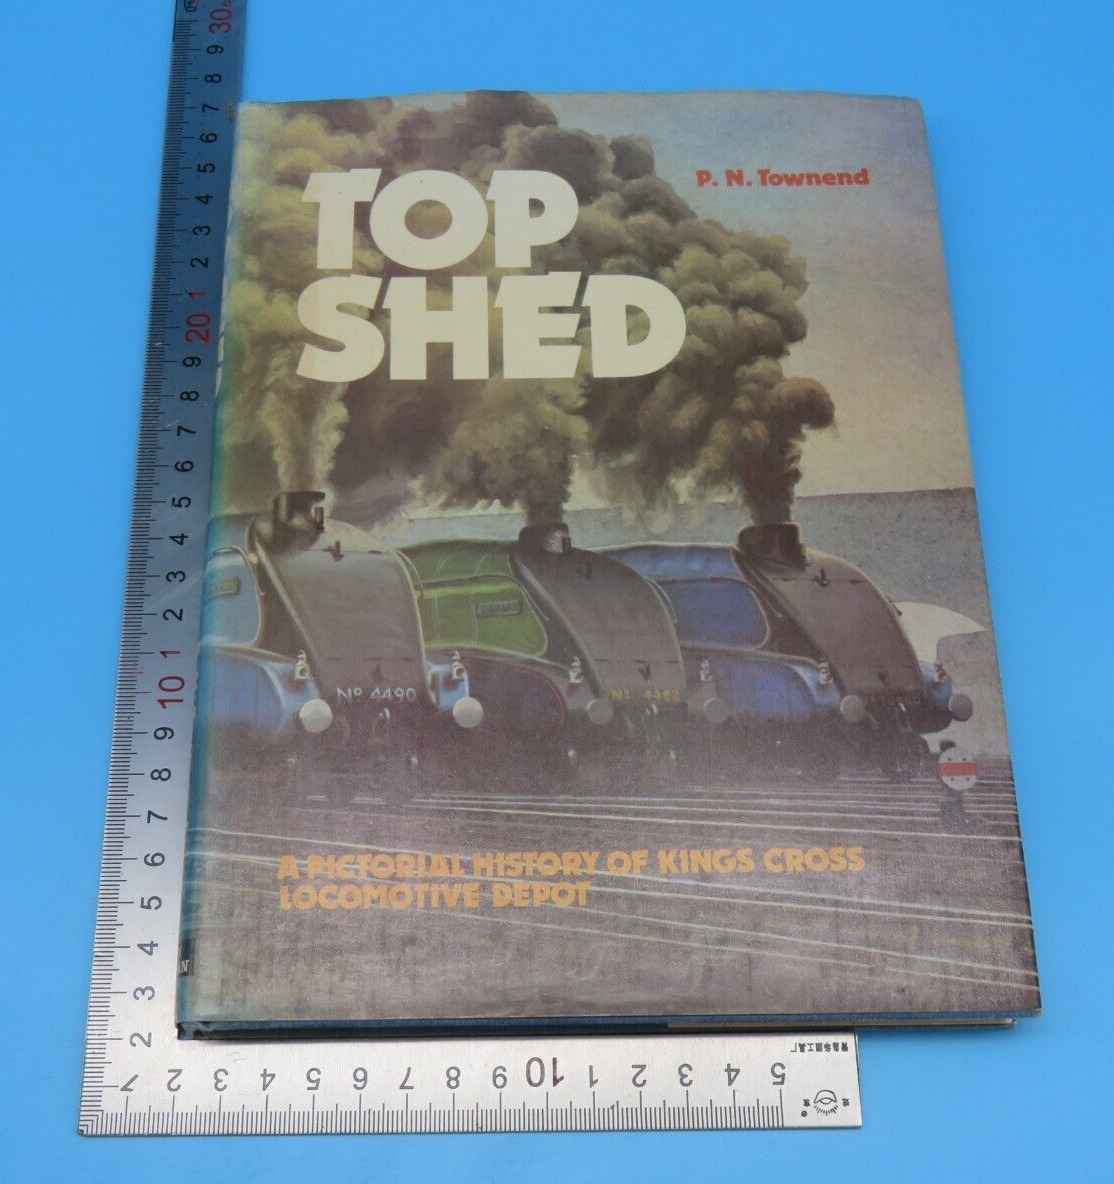 Top Shed P N Townend Signed Hardback 1st Edition 1975 Ian Allan